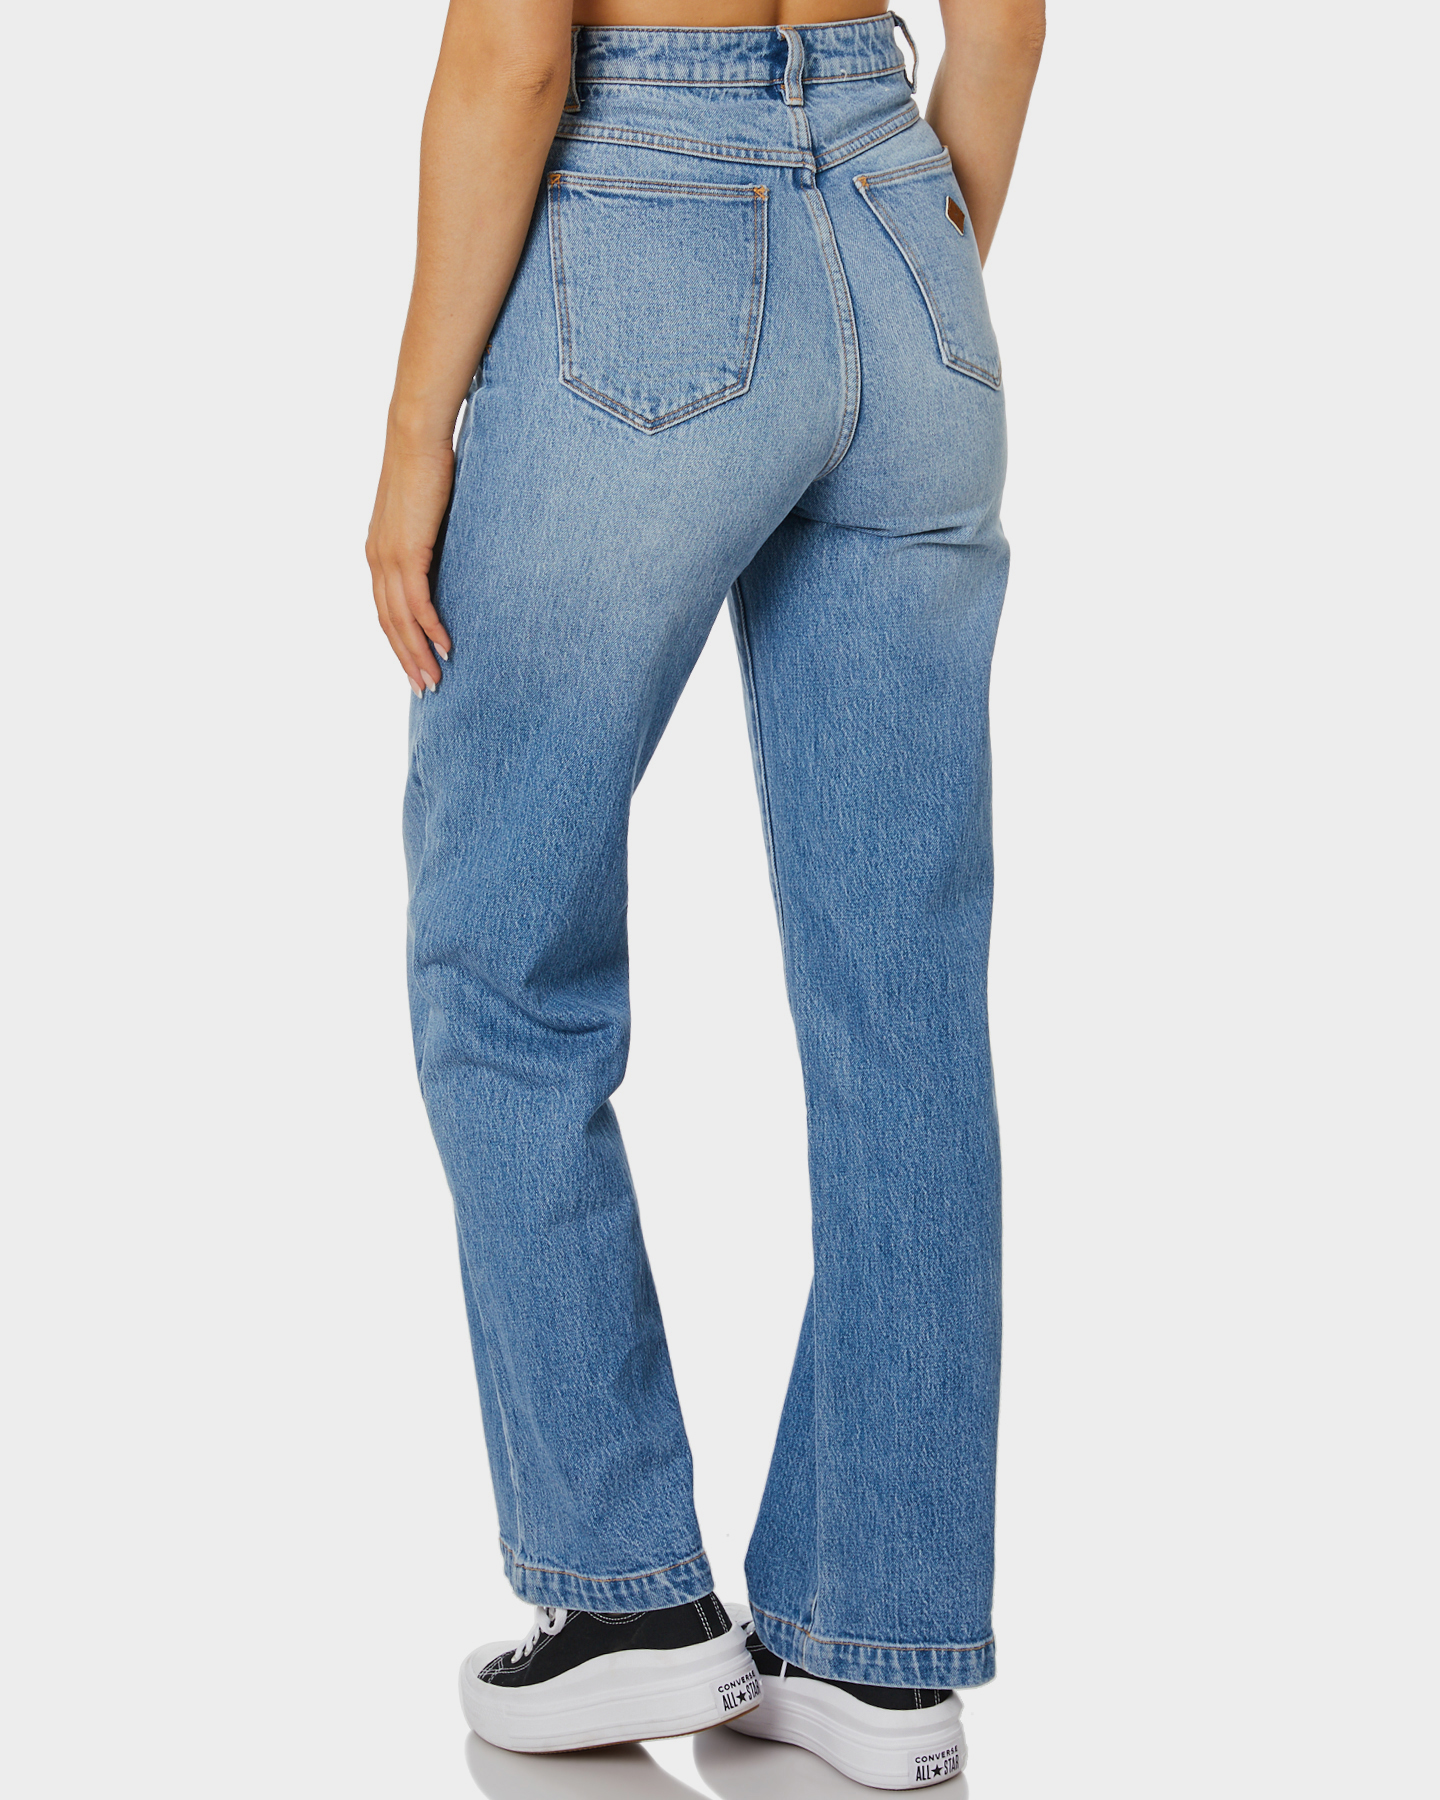 Abrand A 94 High And Wide Jean - Bae Town | SurfStitch